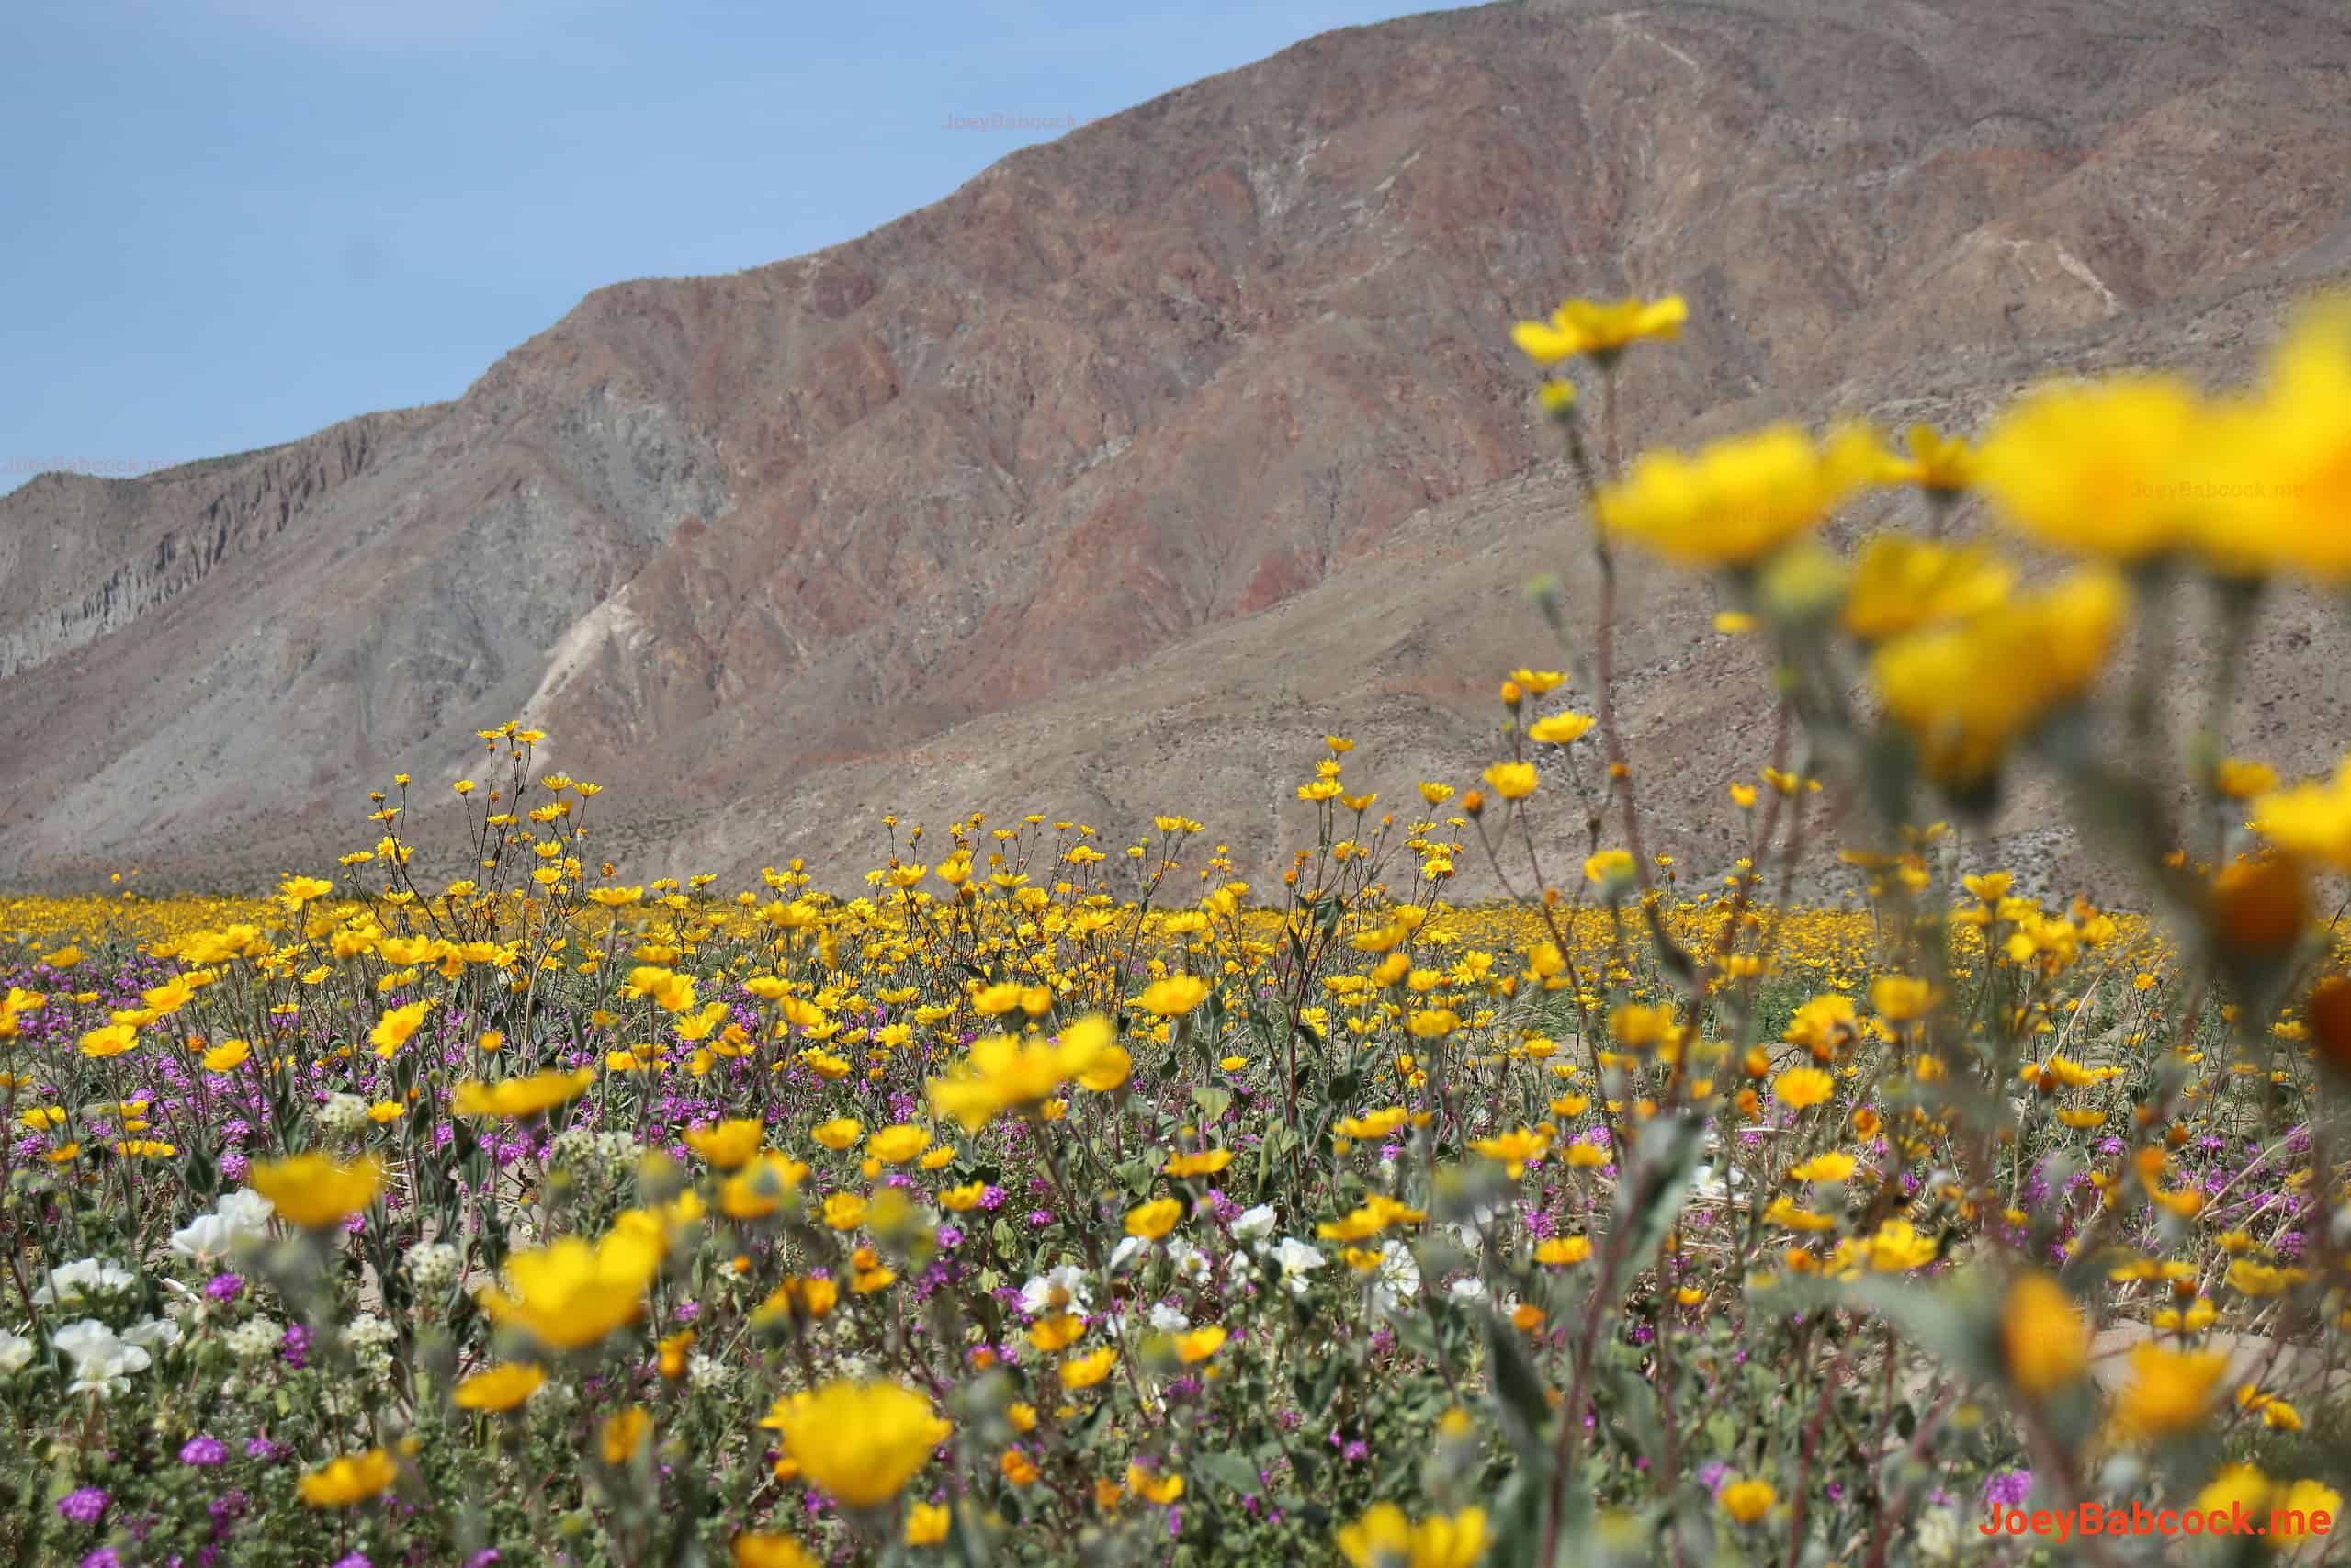 The flowers stretched all the way to the foothills of the mountains. (c) Joey Babcock March 2024 - Borrego Springs, CA